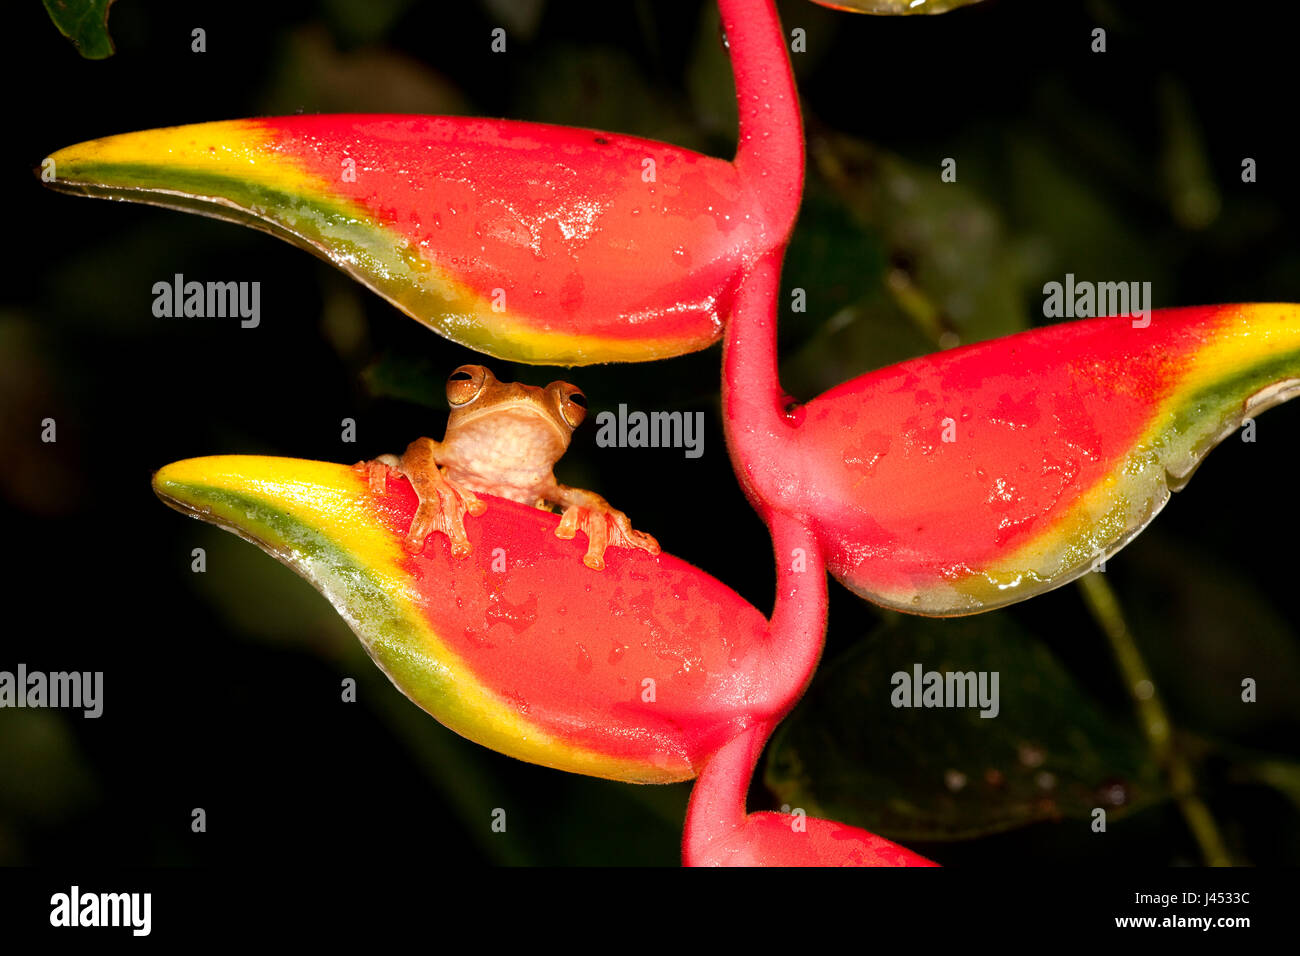 Photo of a Harlequin tree frog looking between the flowers of a Crab Claw Flower Stock Photo